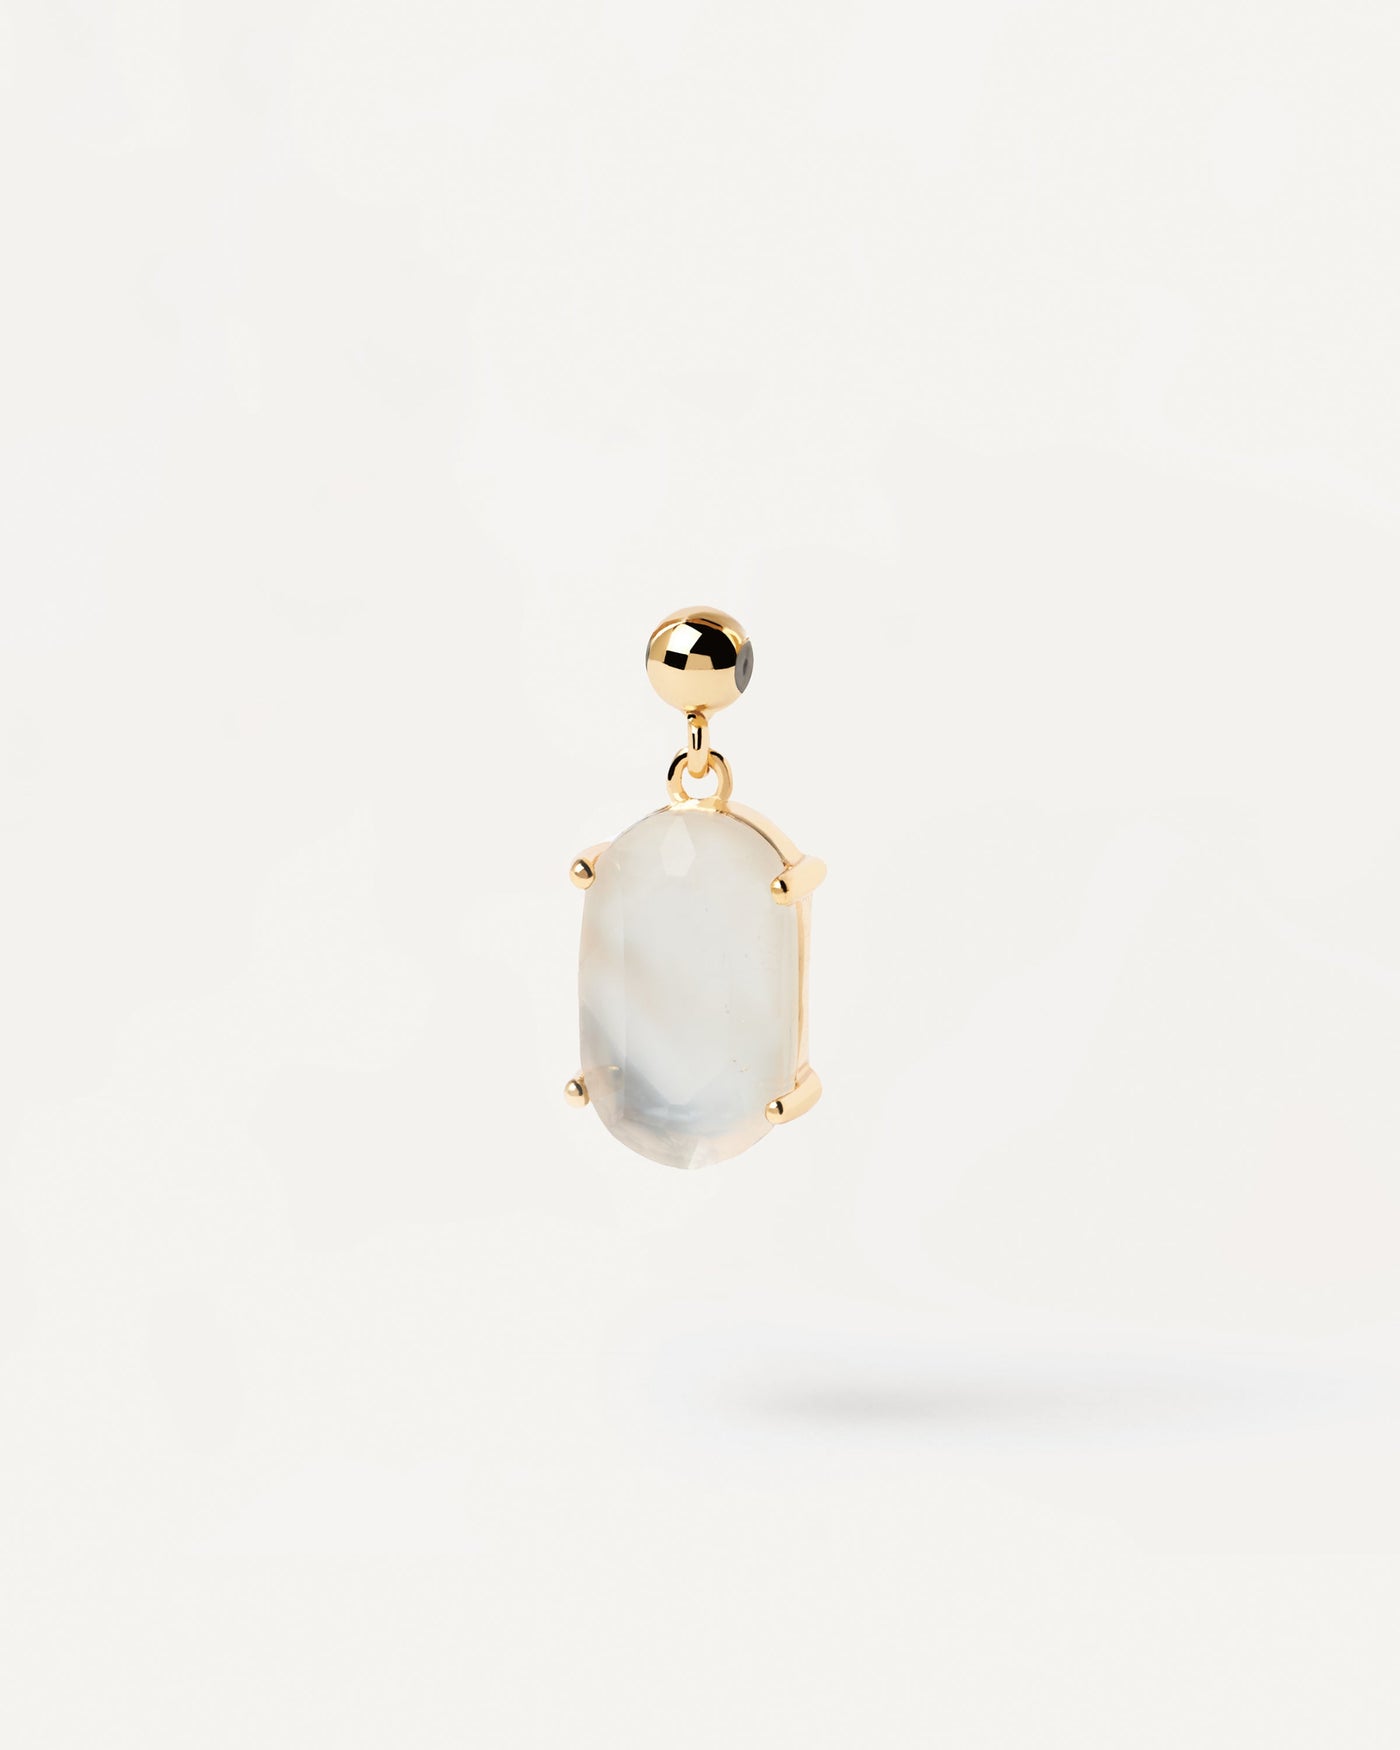 2023 Selection | Mother Of Pearl Intuition Charm. White nacre stone Charm pendant for personalized necklace or bracelet. Get the latest arrival from PDPAOLA. Place your order safely and get this Best Seller. Free Shipping.